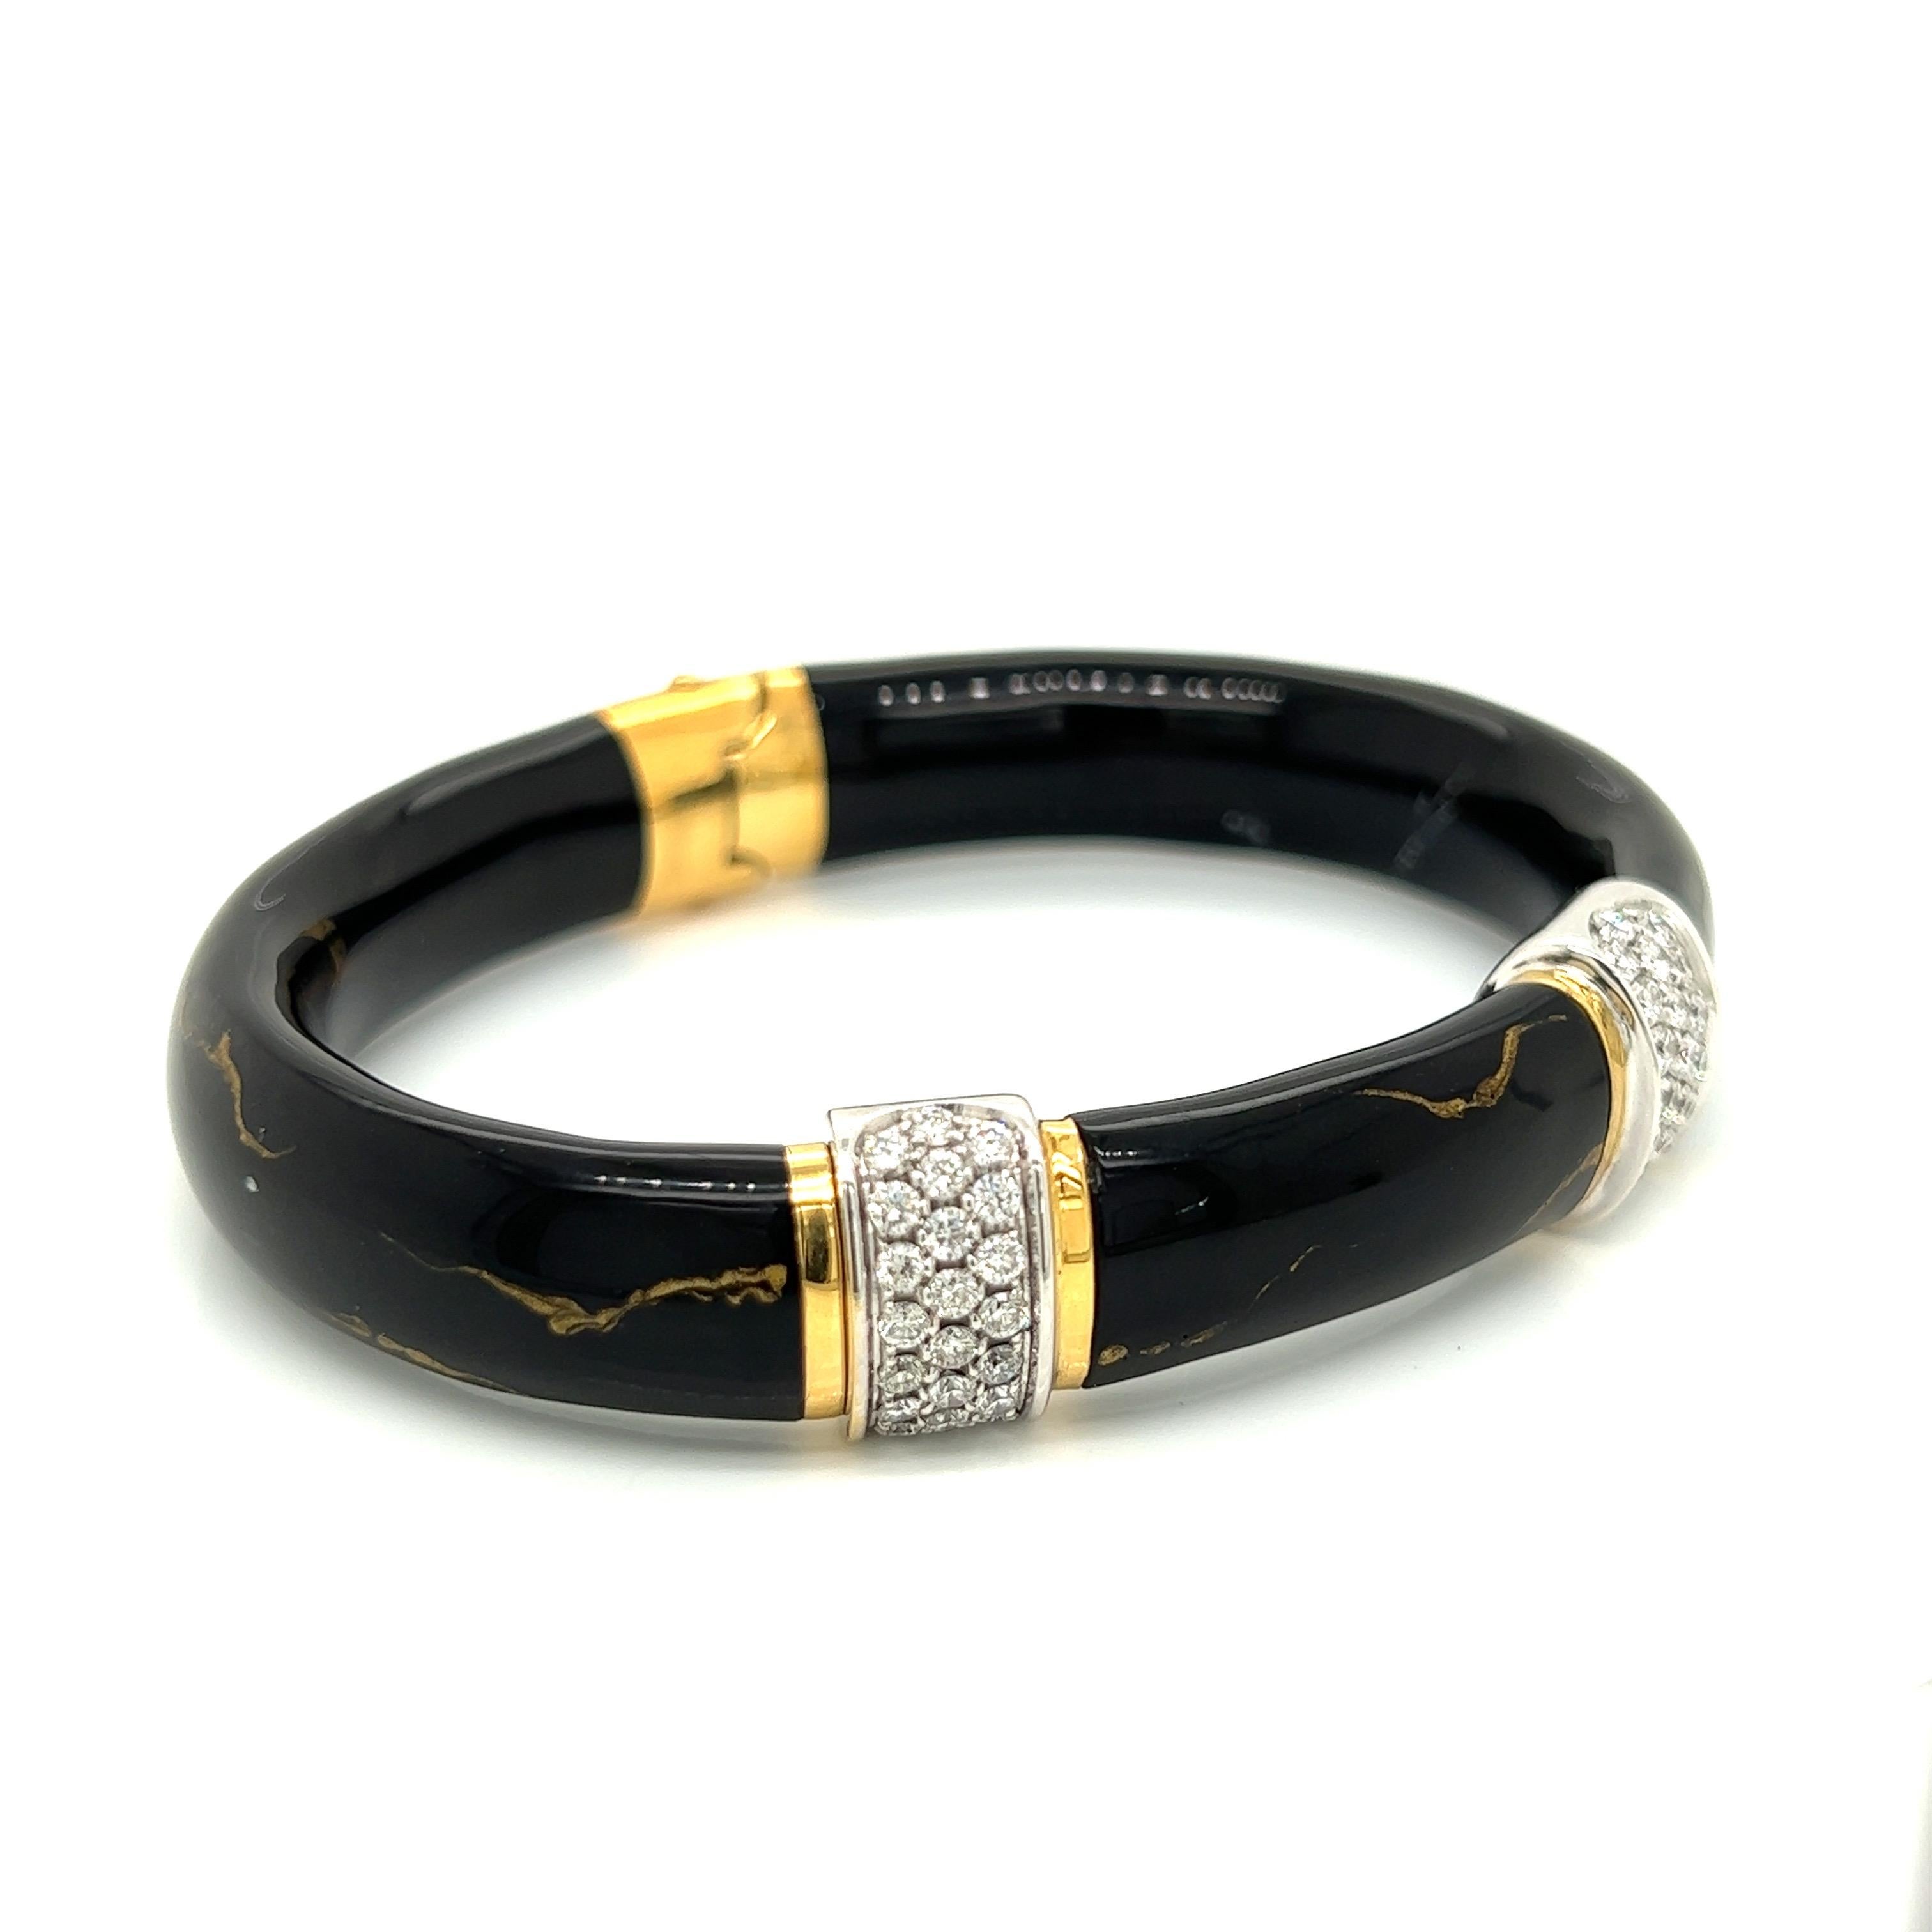 Soho's black and gold bangle is handcrafted in Italy. The traditional yet modern bangle is 18kt. white and yellow gold, enamel, and 1.32 ctw in diamonds. The 11mm wide bangle has a hidden hinge on top. Interior dimensions are 2.5